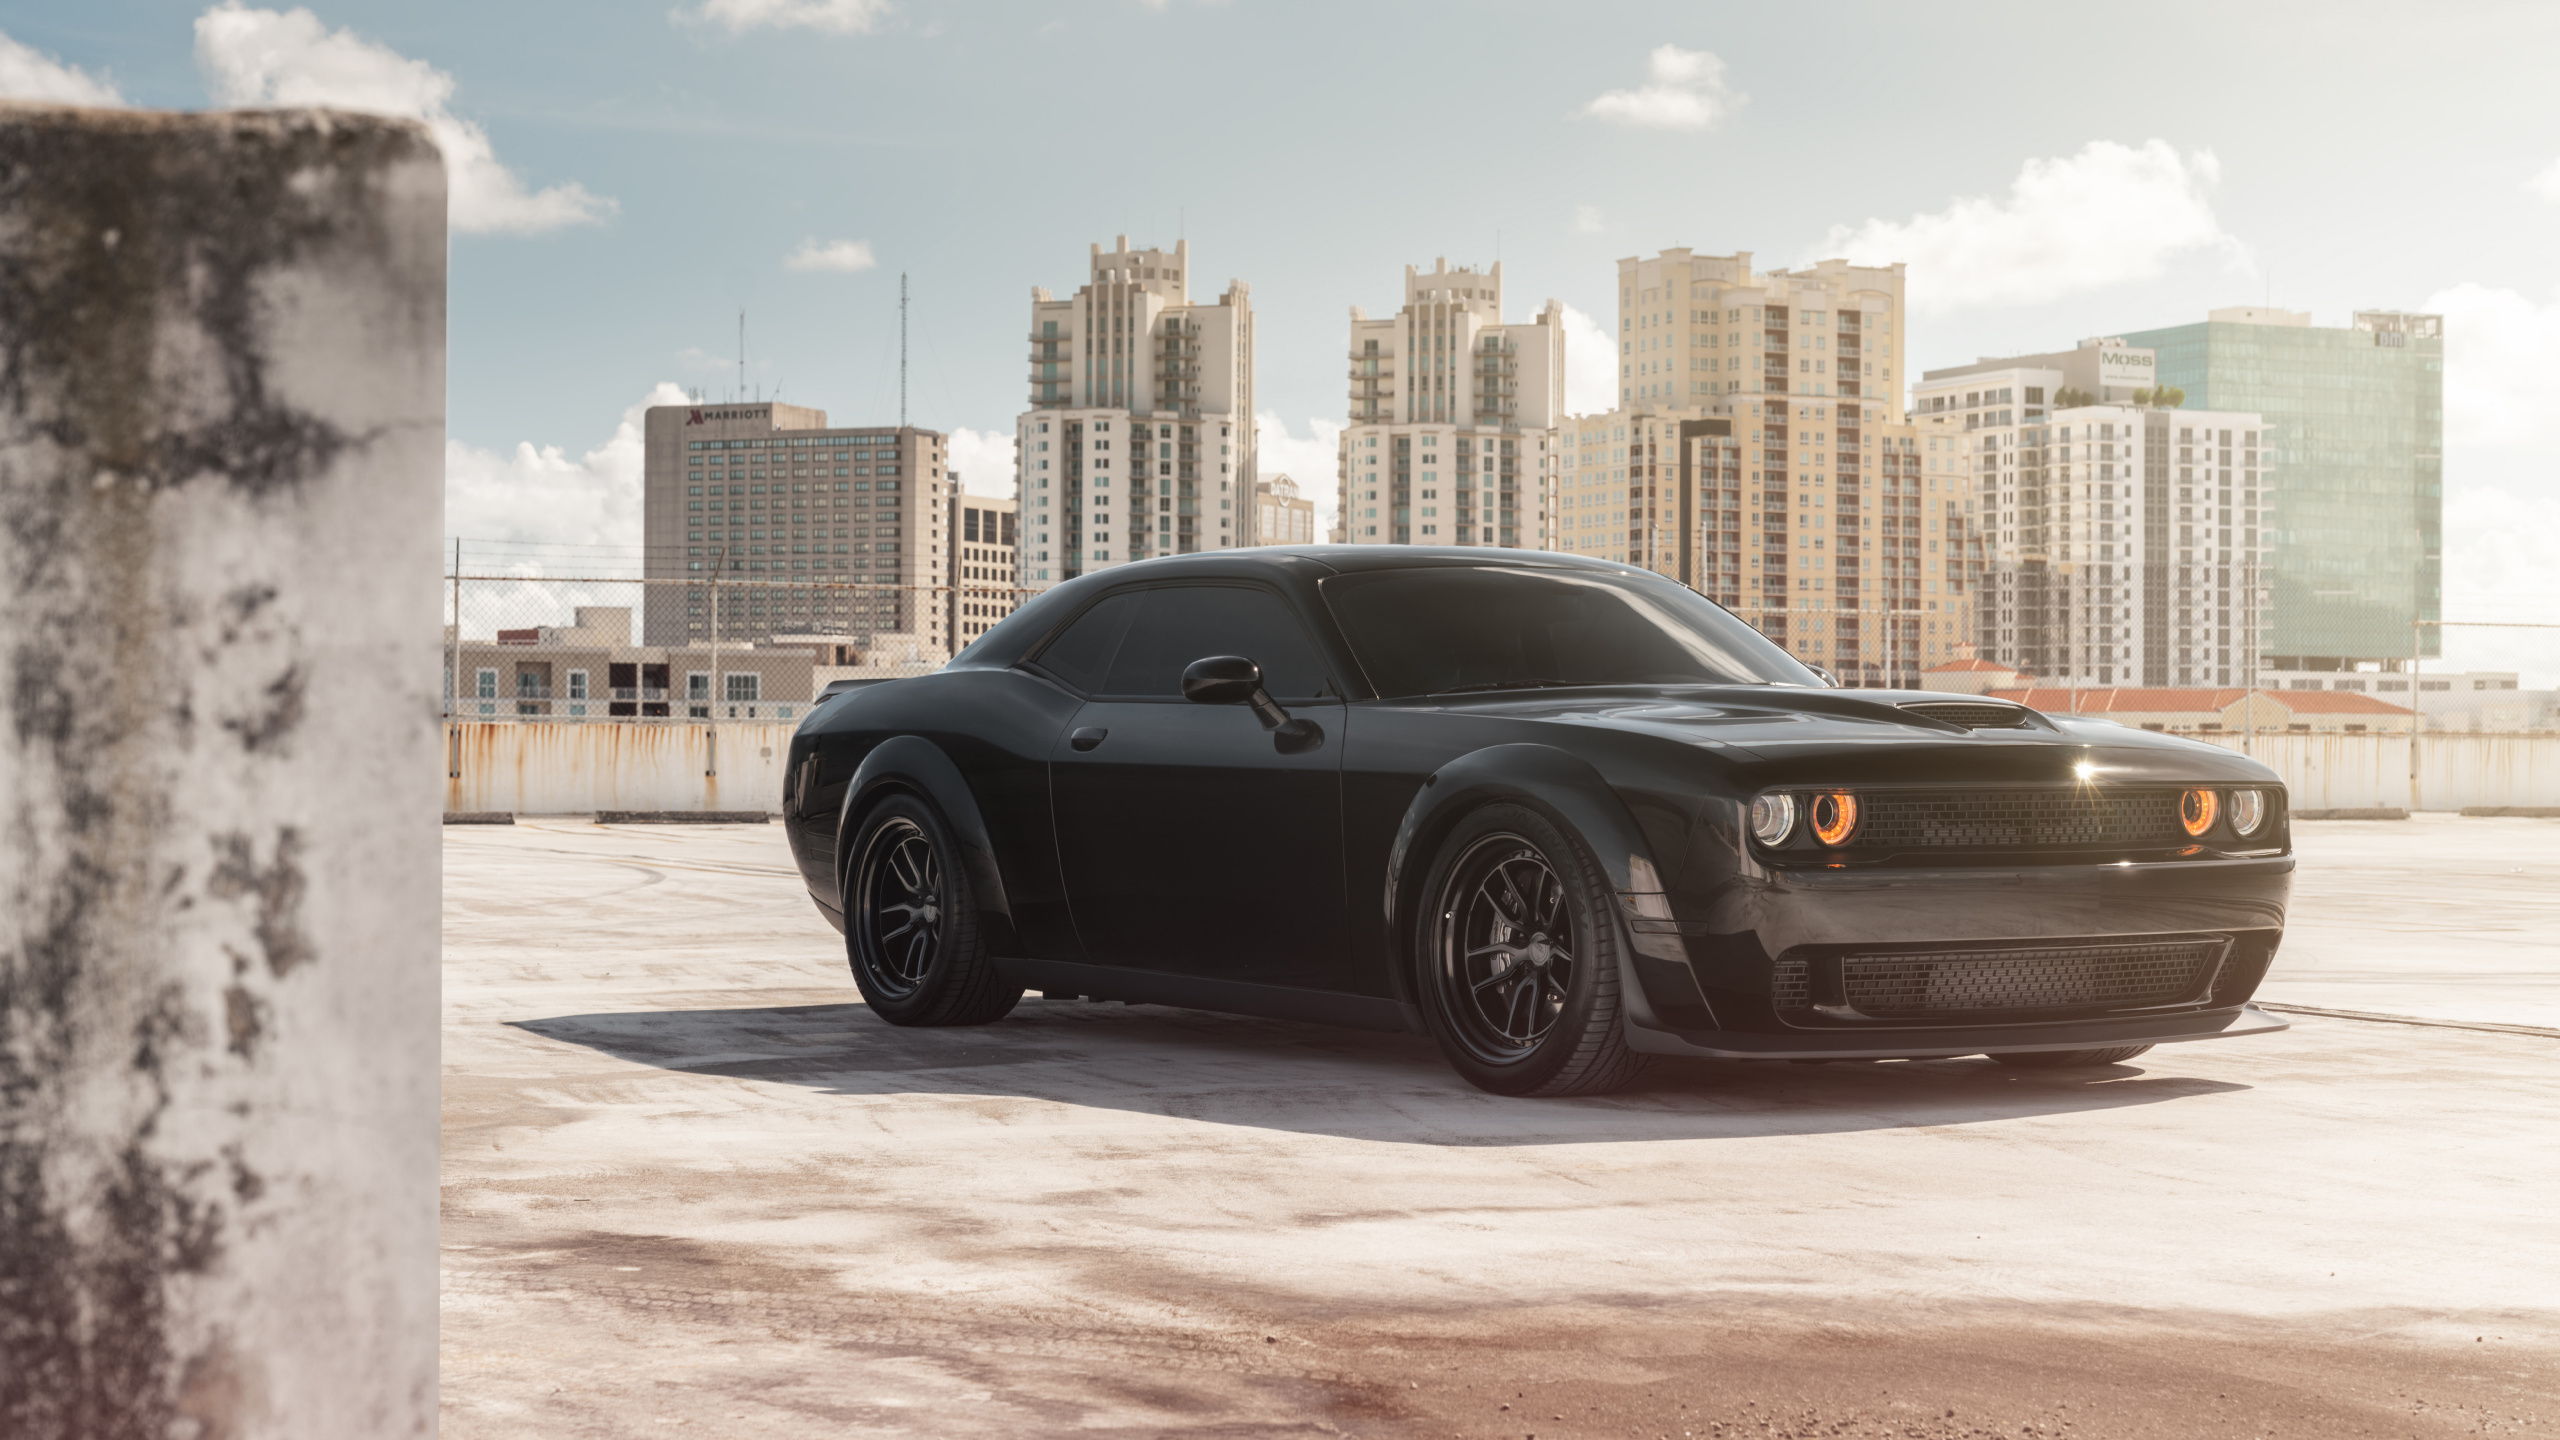 Black Coupe Parked on Gray Concrete Pavement During Daytime. Wallpaper in 2560x1440 Resolution